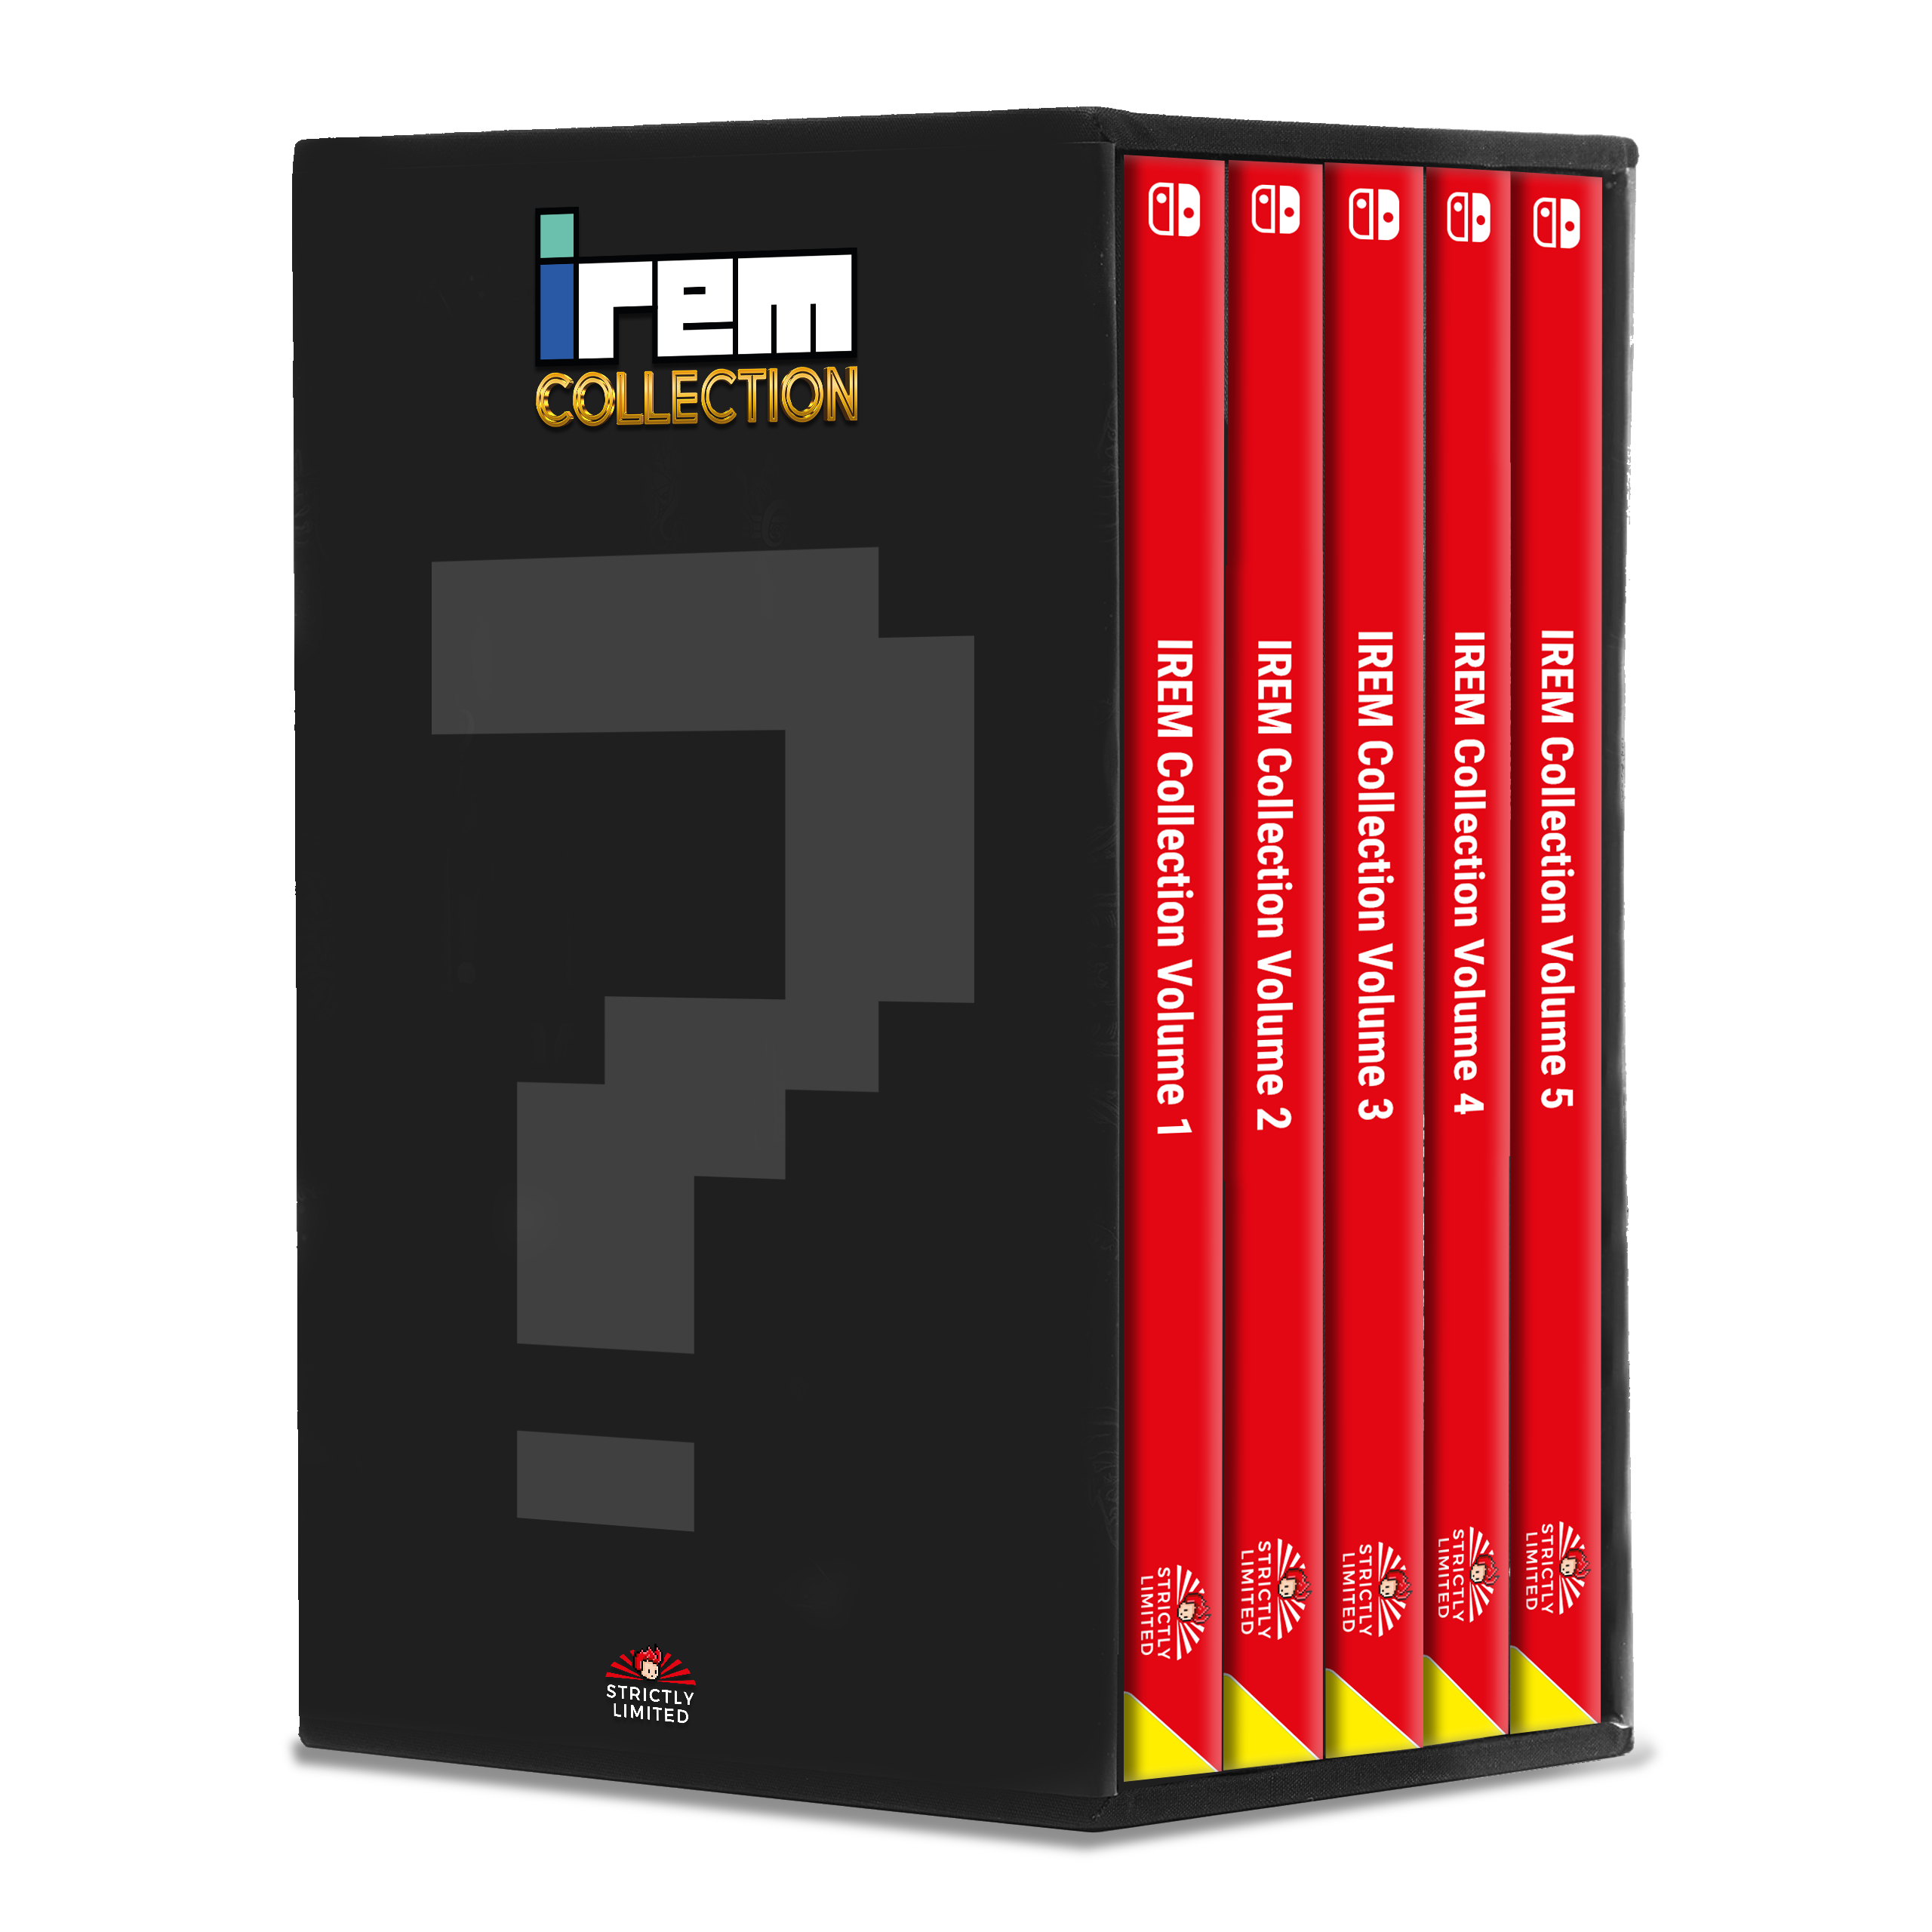 Irem Collection Volume 1 5 Limited Edition Bundle Nintendo Switch Strictly Limited Games